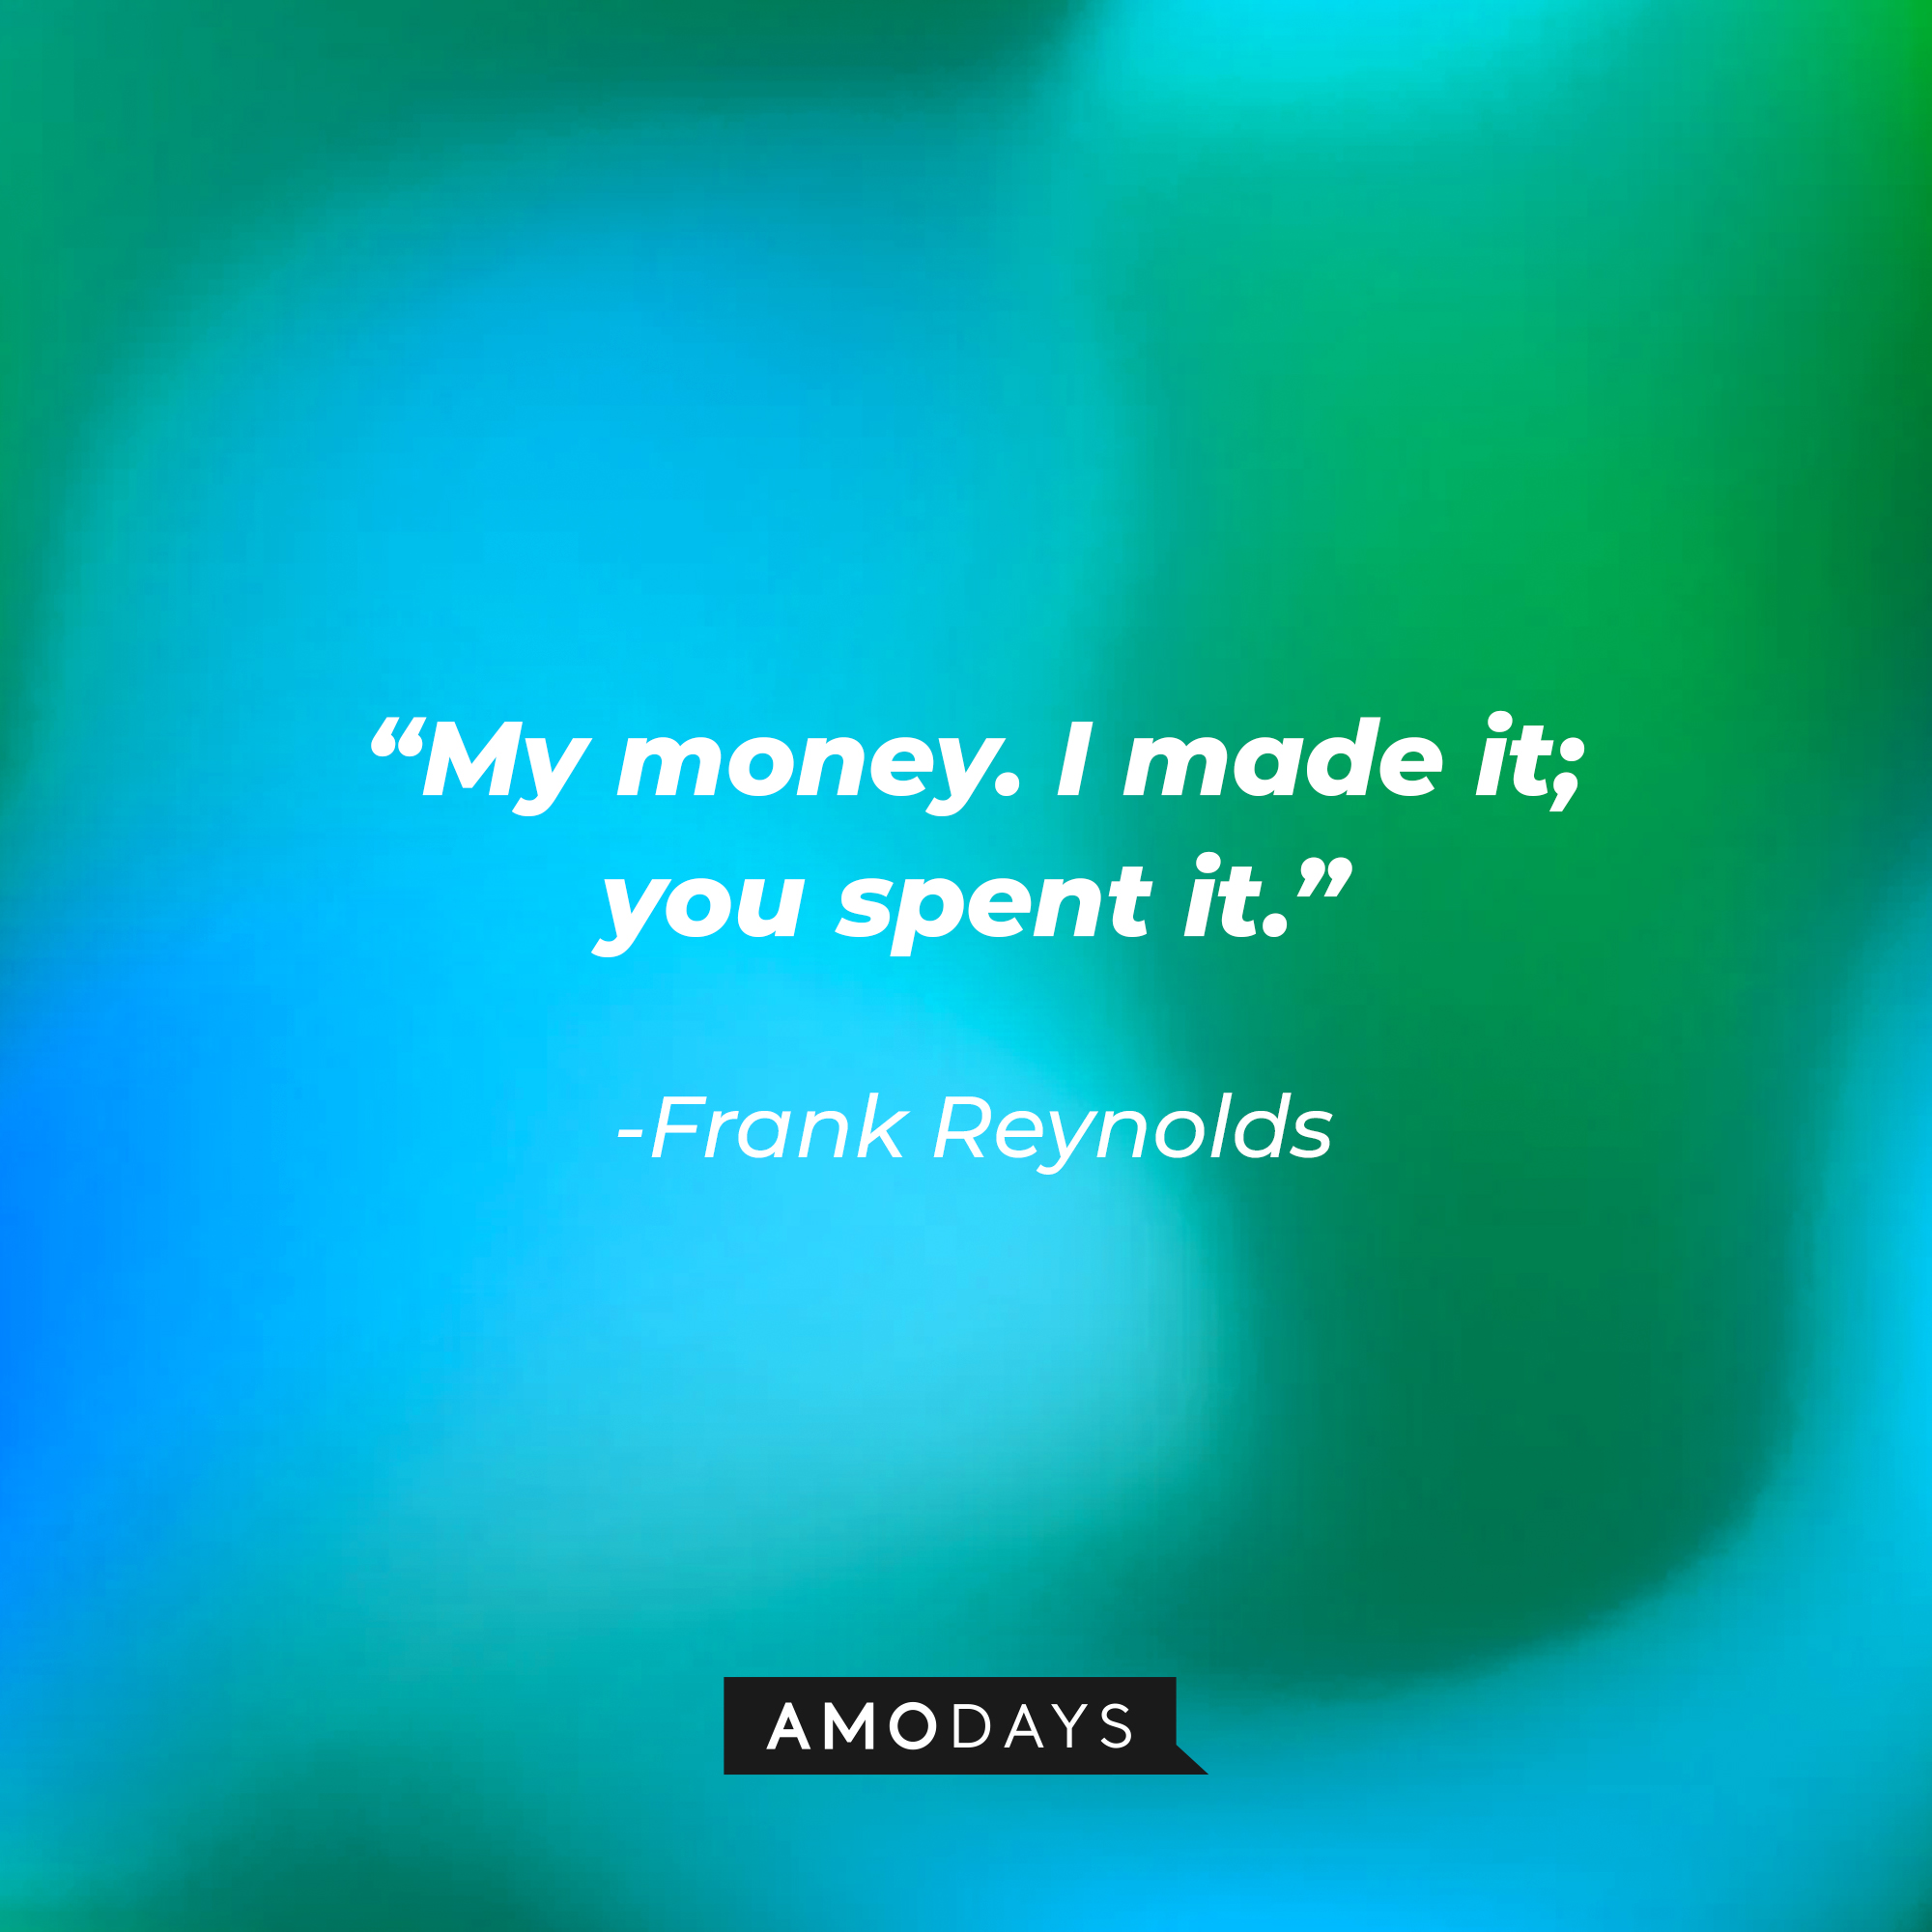 Frank Reynolds quote: “My money. I made it; you spent it.” | Source: facebook.com/alwayssunny